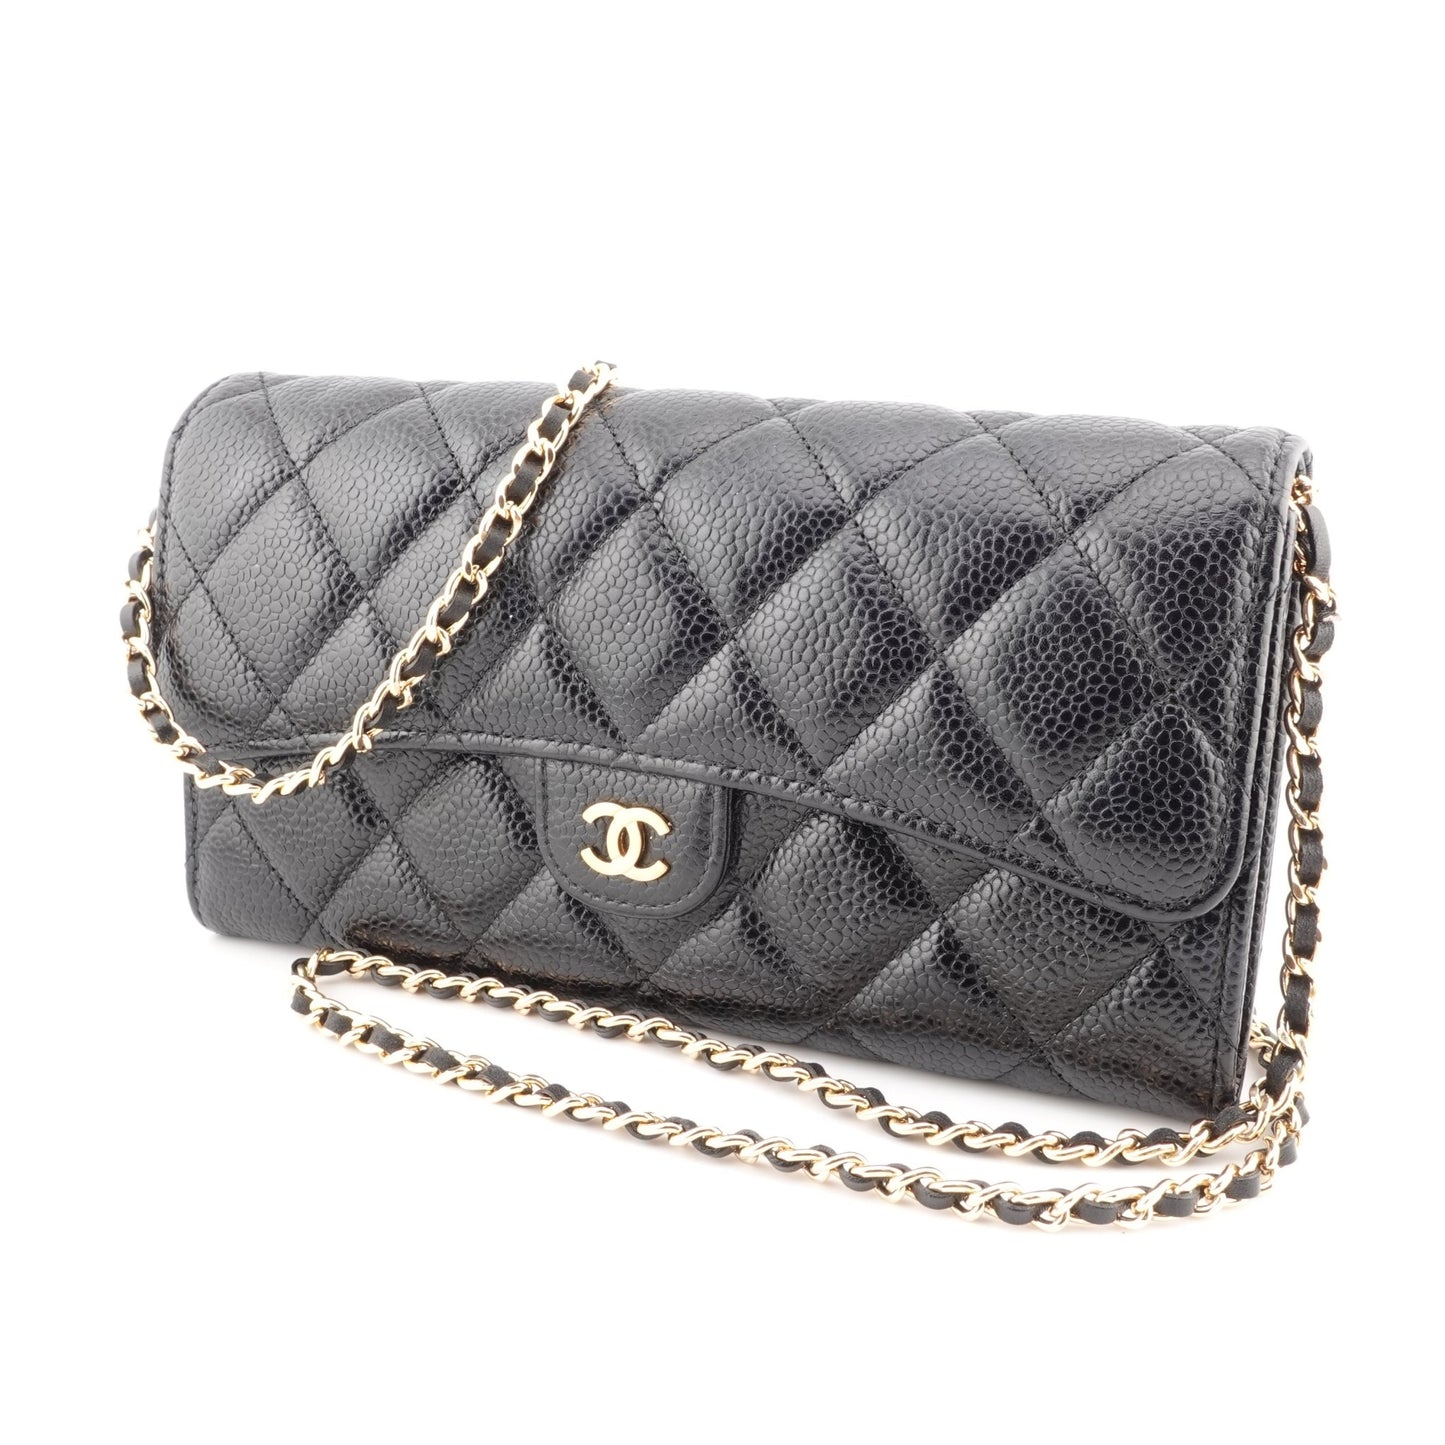 CHANEL Caviar Classic Flap Gusseted Wallet on Chain - Bag Envy